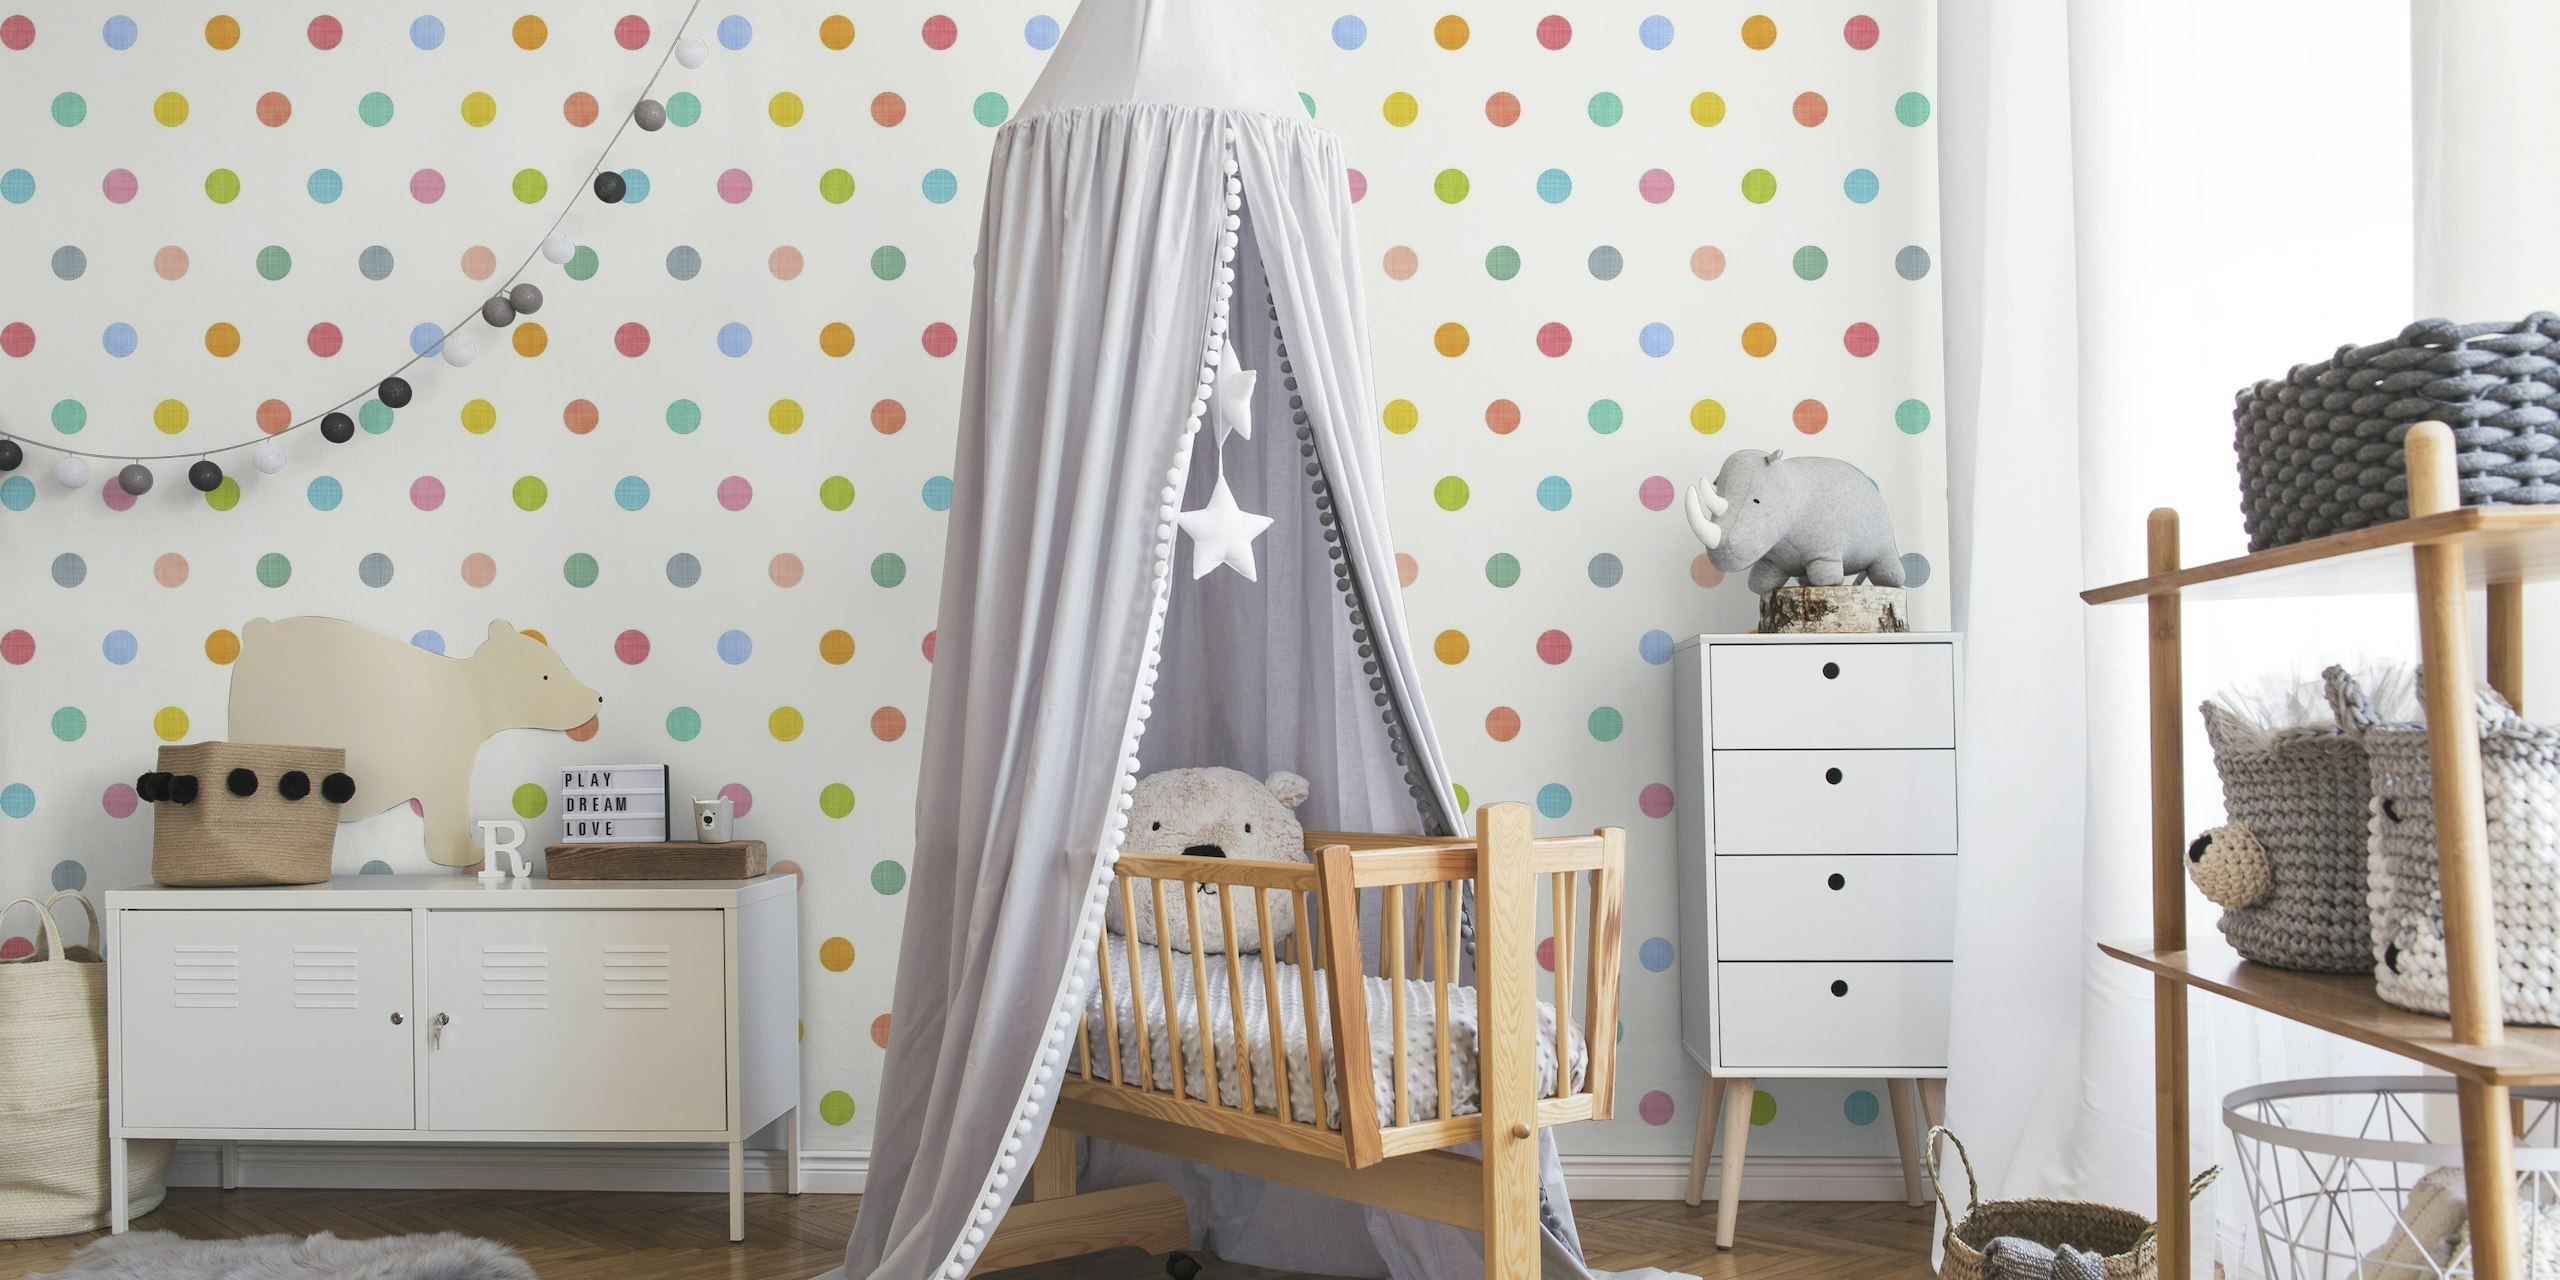 Pastel Rainbow Polka Dots wall mural with multicolored dots on a neutral background